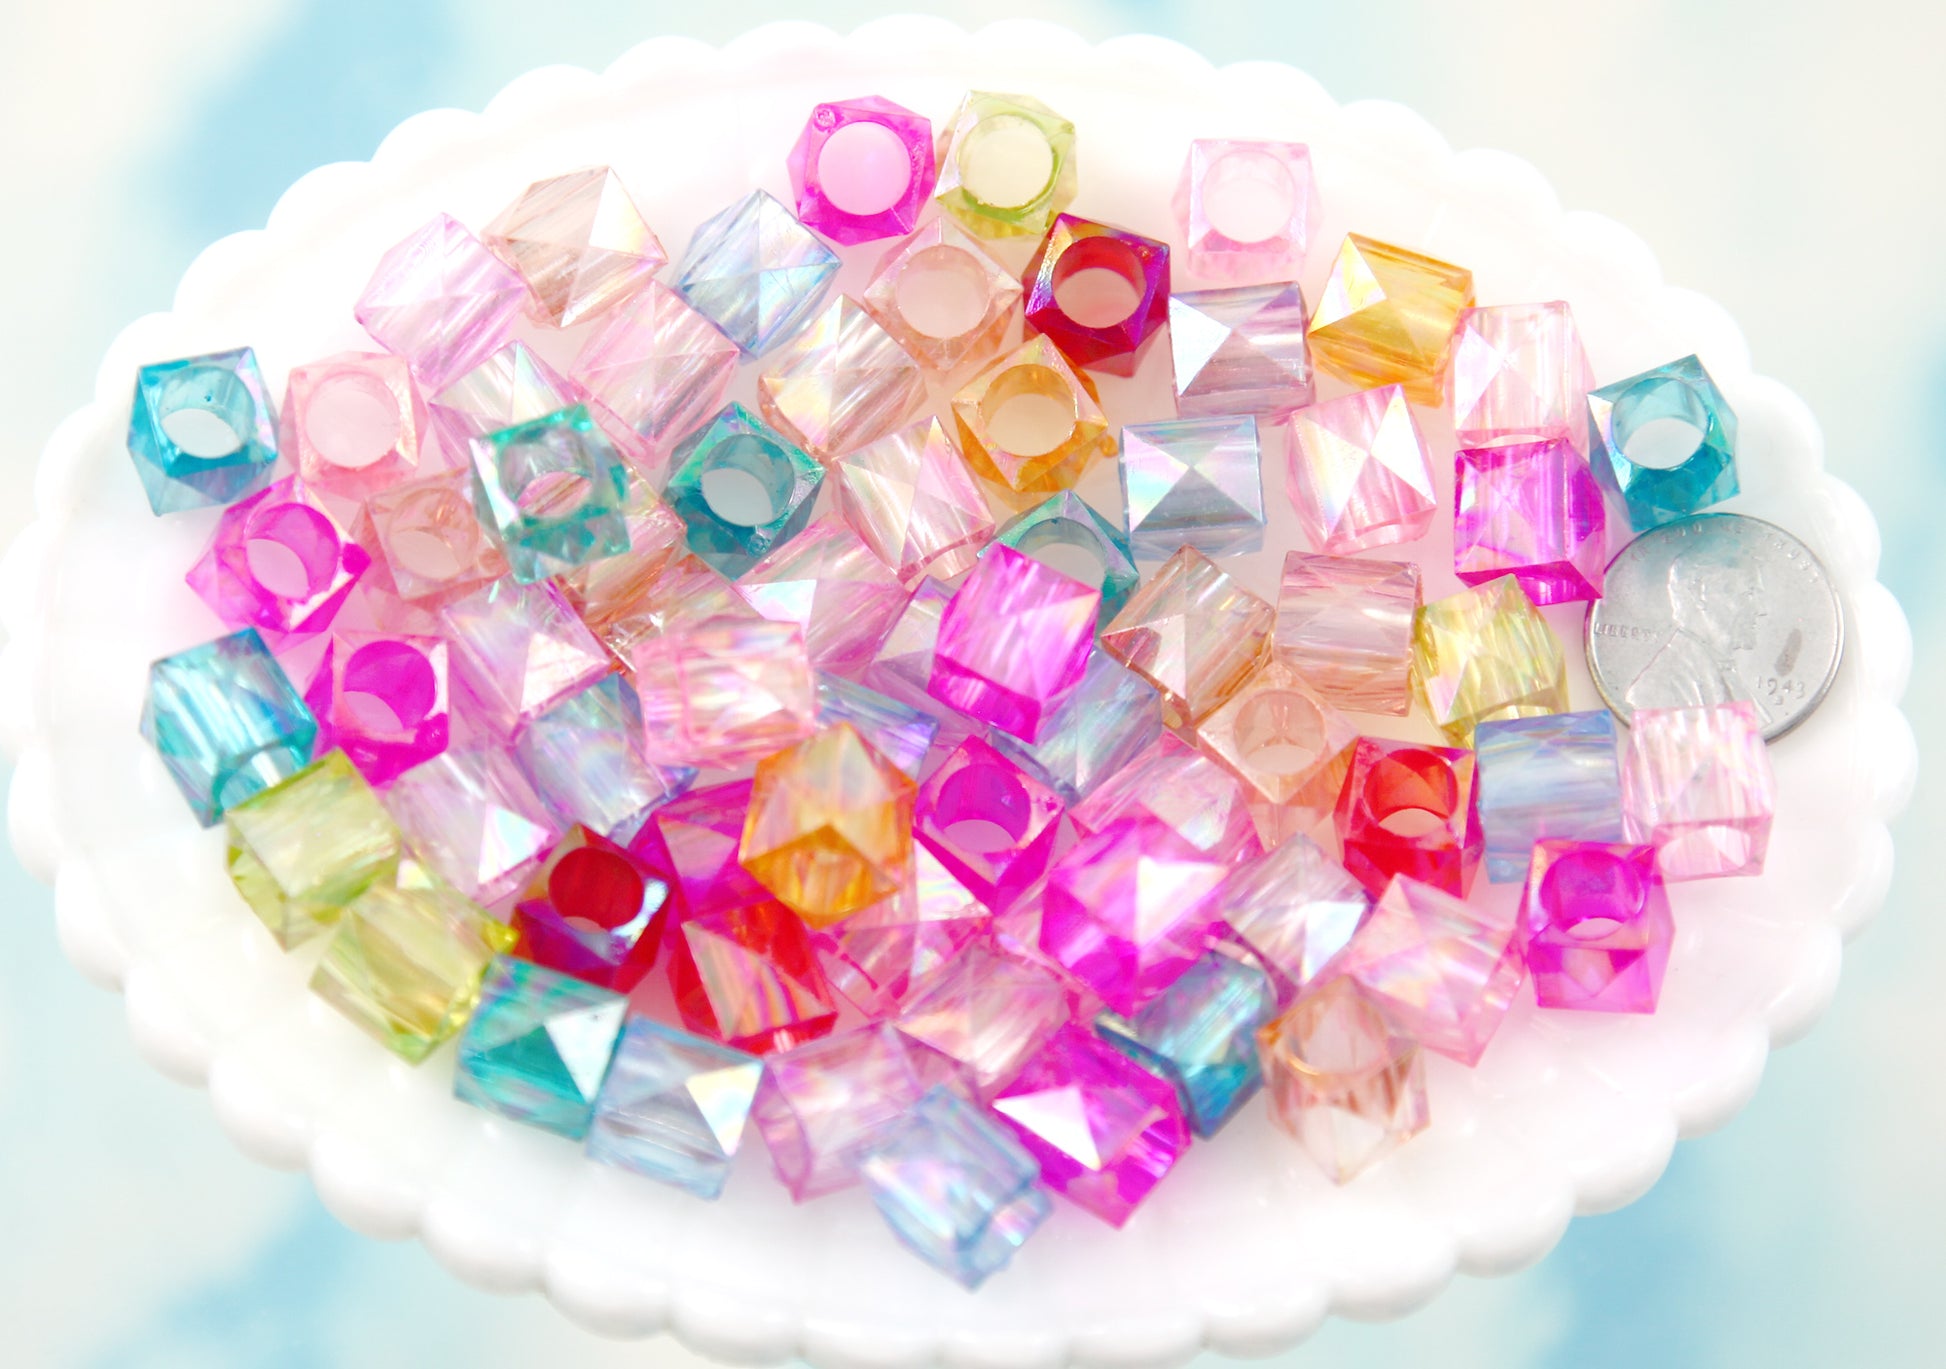 Clear Iridescent Faceted Plastic Beads